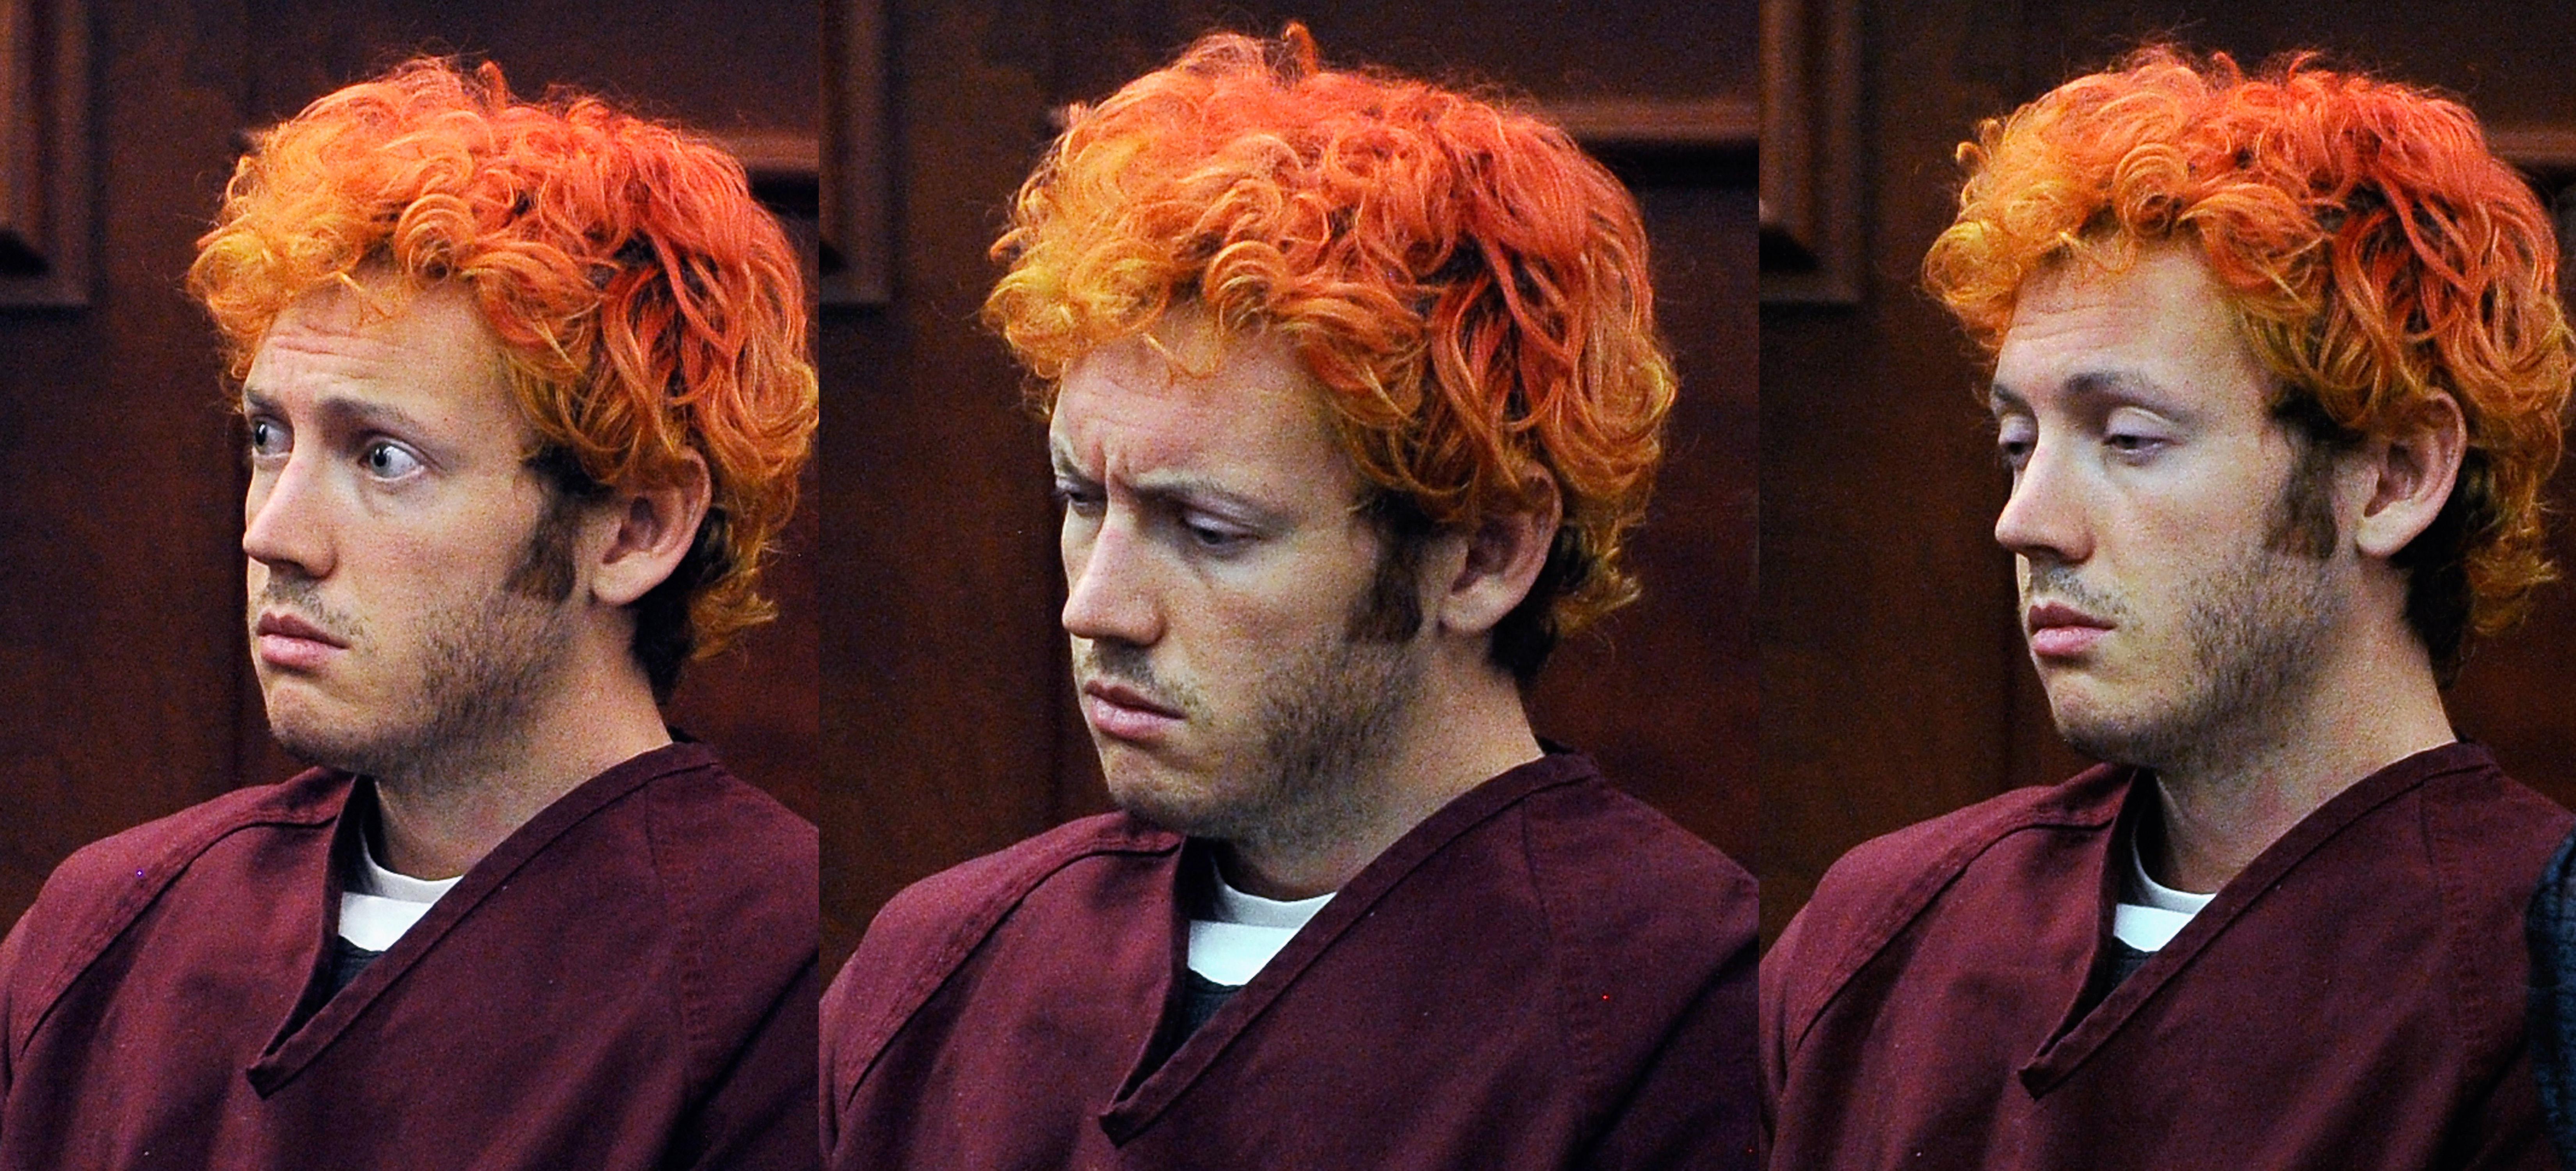 James Holmes makes his first court appearance at the Arapahoe County.